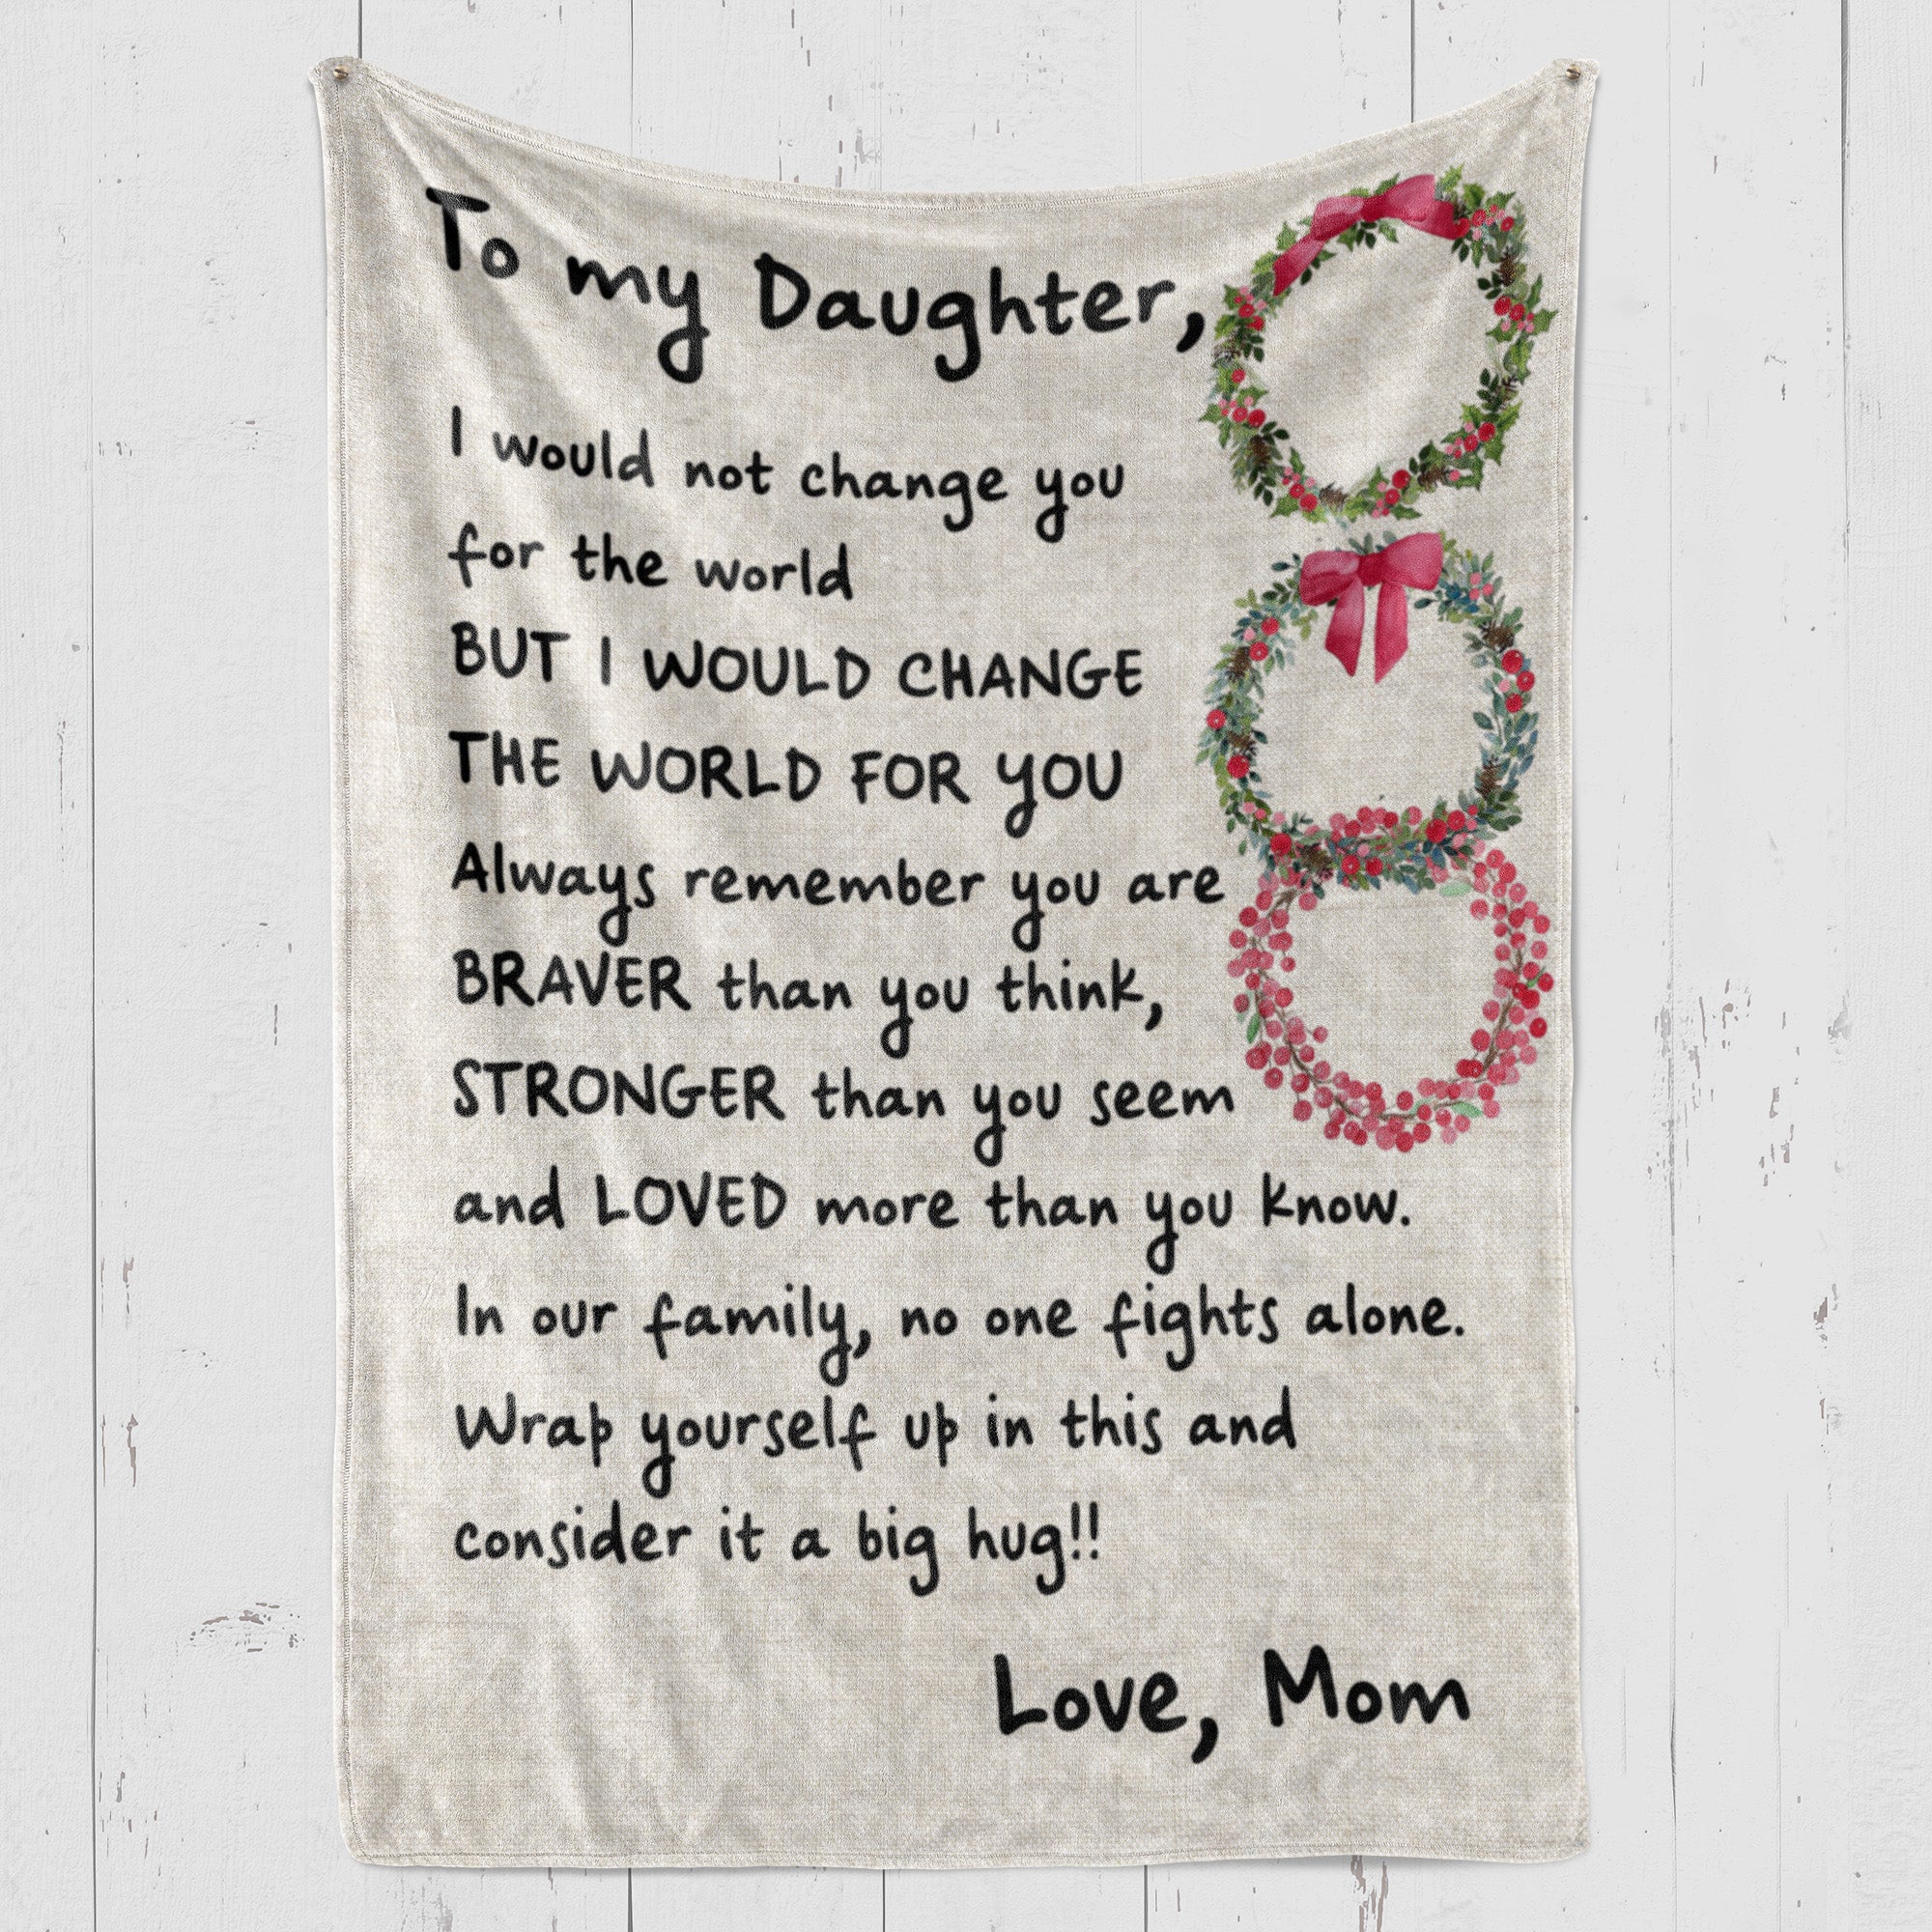 Blanket Birthday Gifts For Daughter, Best Christmas Gifts For Daughter, I Would Not